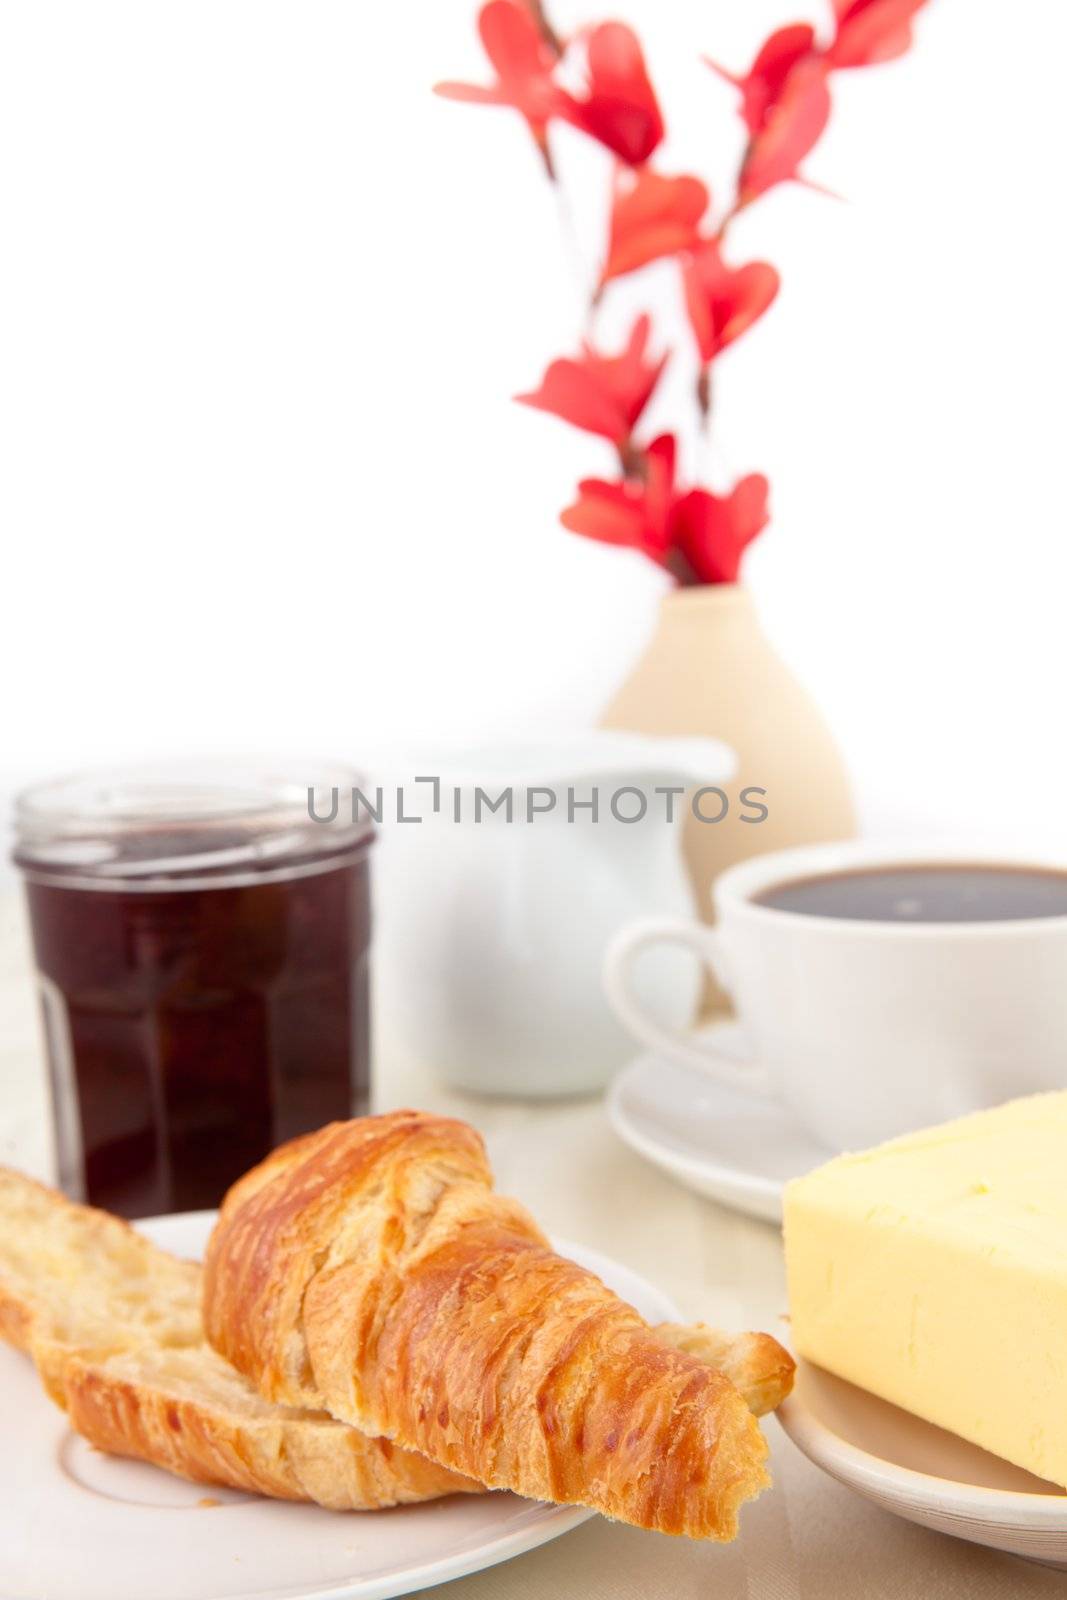 Table presentation for a breakfast against white background